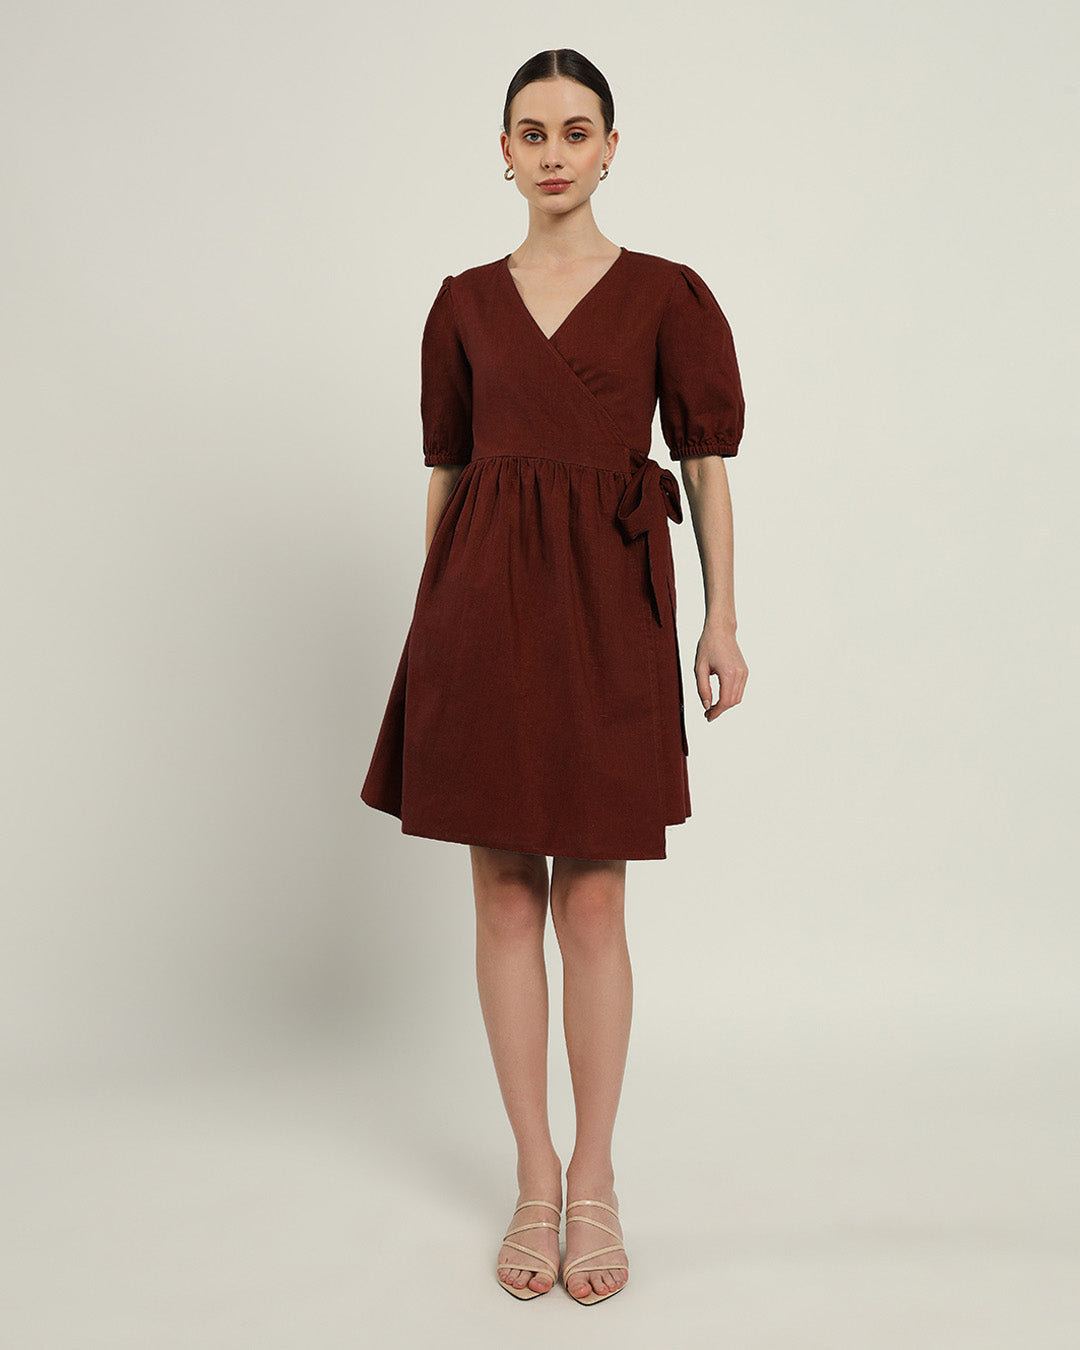 The Inzai Rouge Cotton Dress